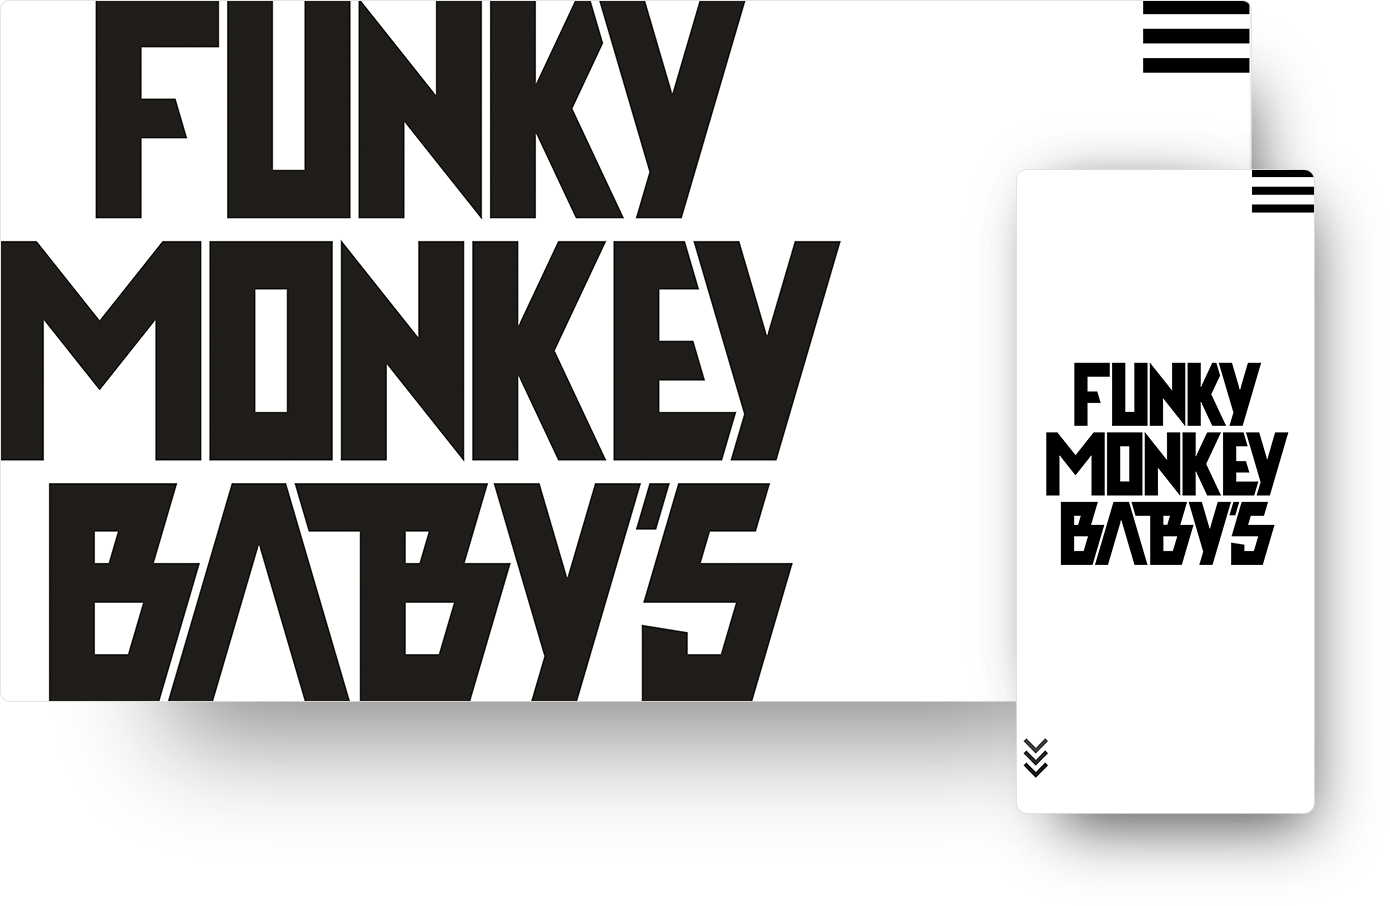 FUNKY MONKEY BΛBY’S